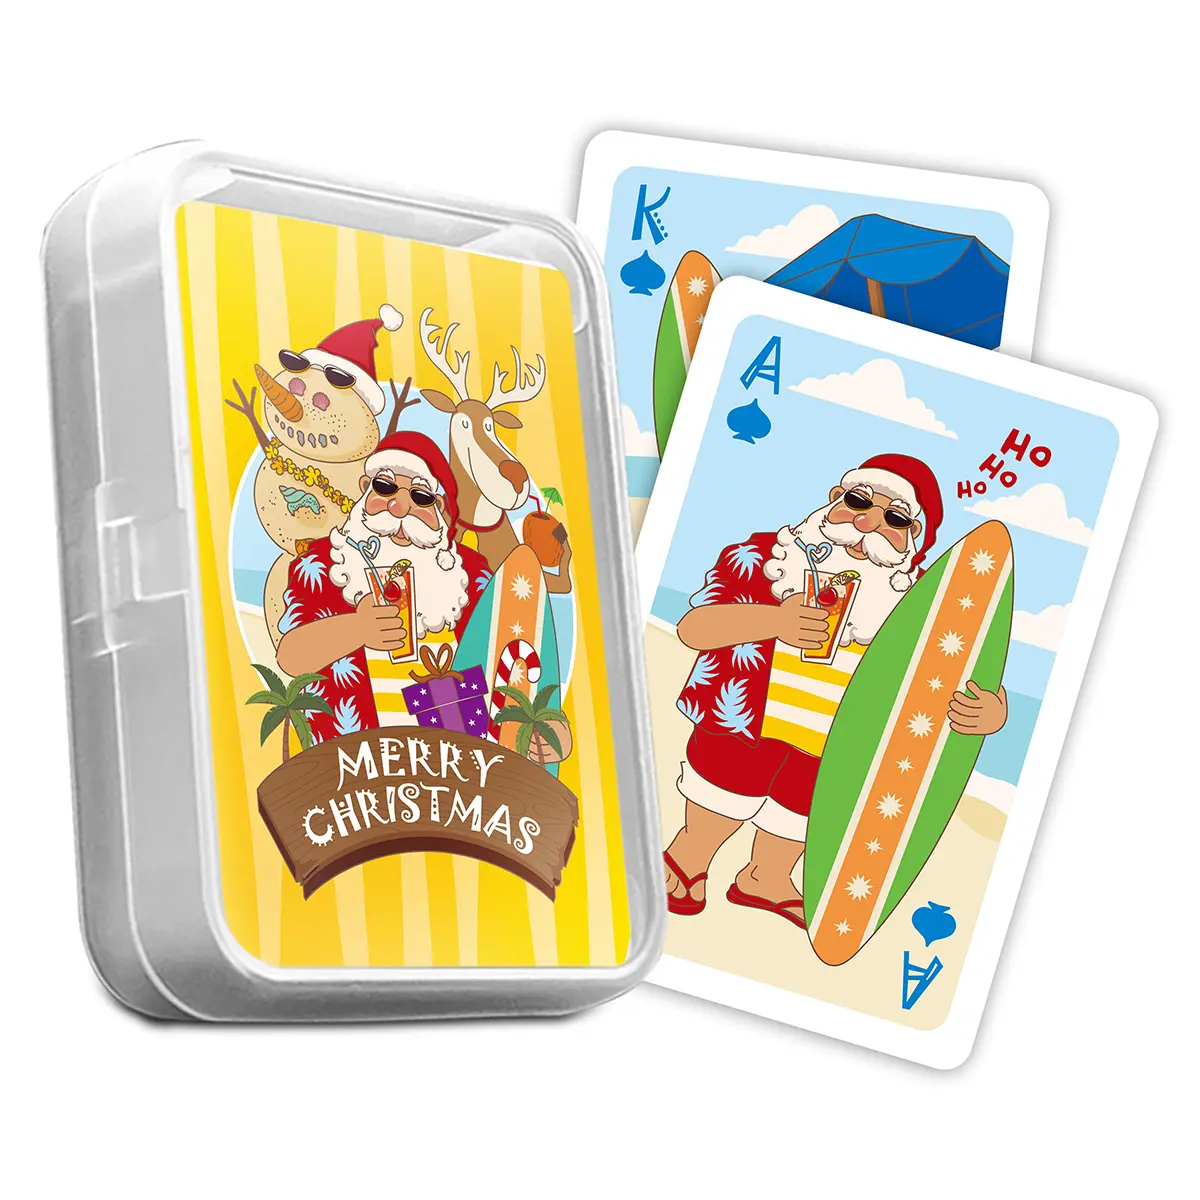 Summer Christmas Playing Cards